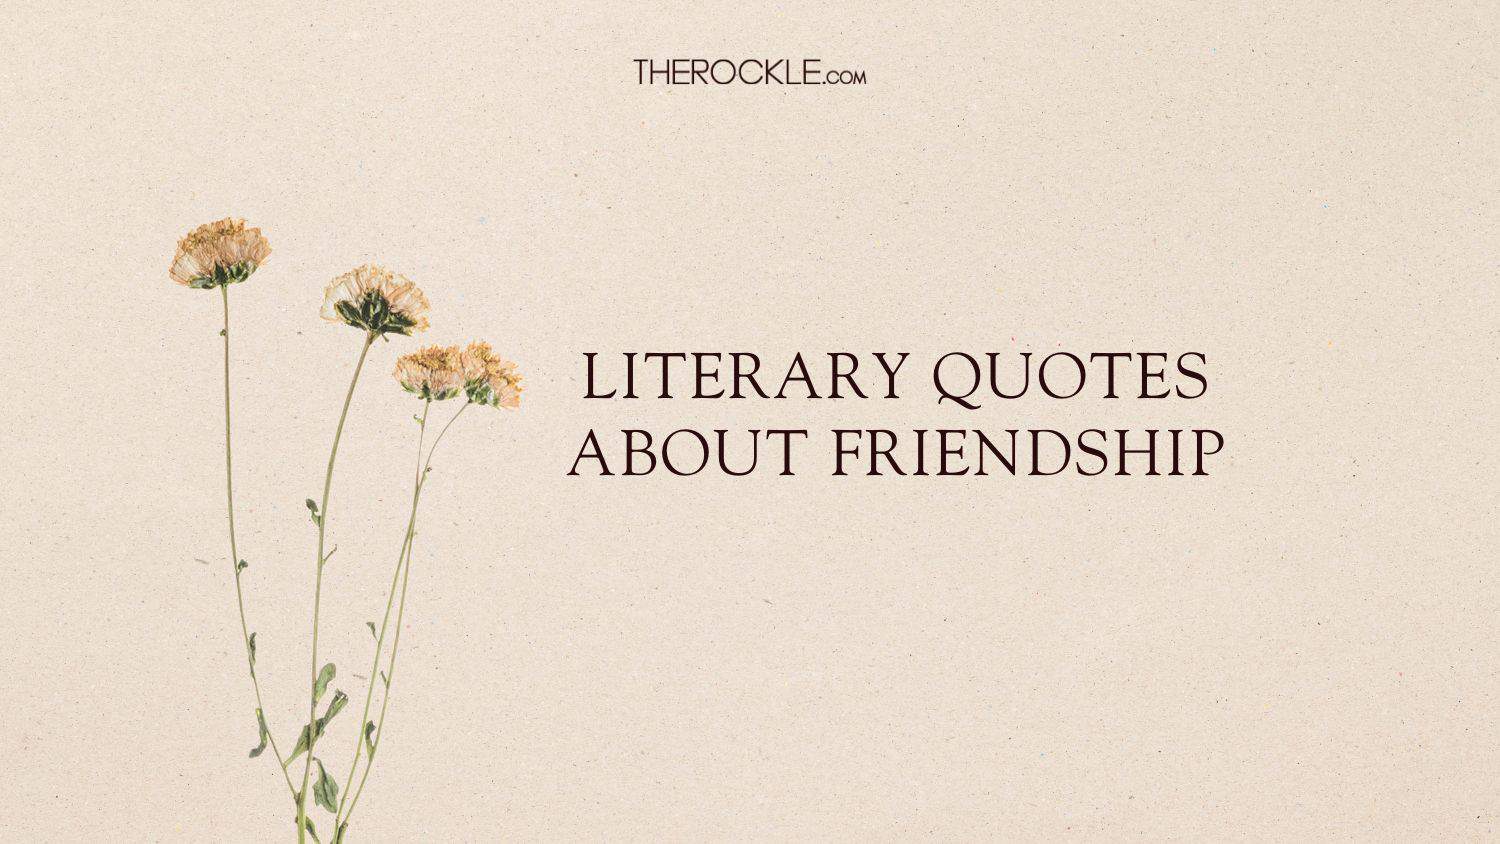 12 Book Quotes About Friendship That’ll Make You Want to Hug Your Bestie